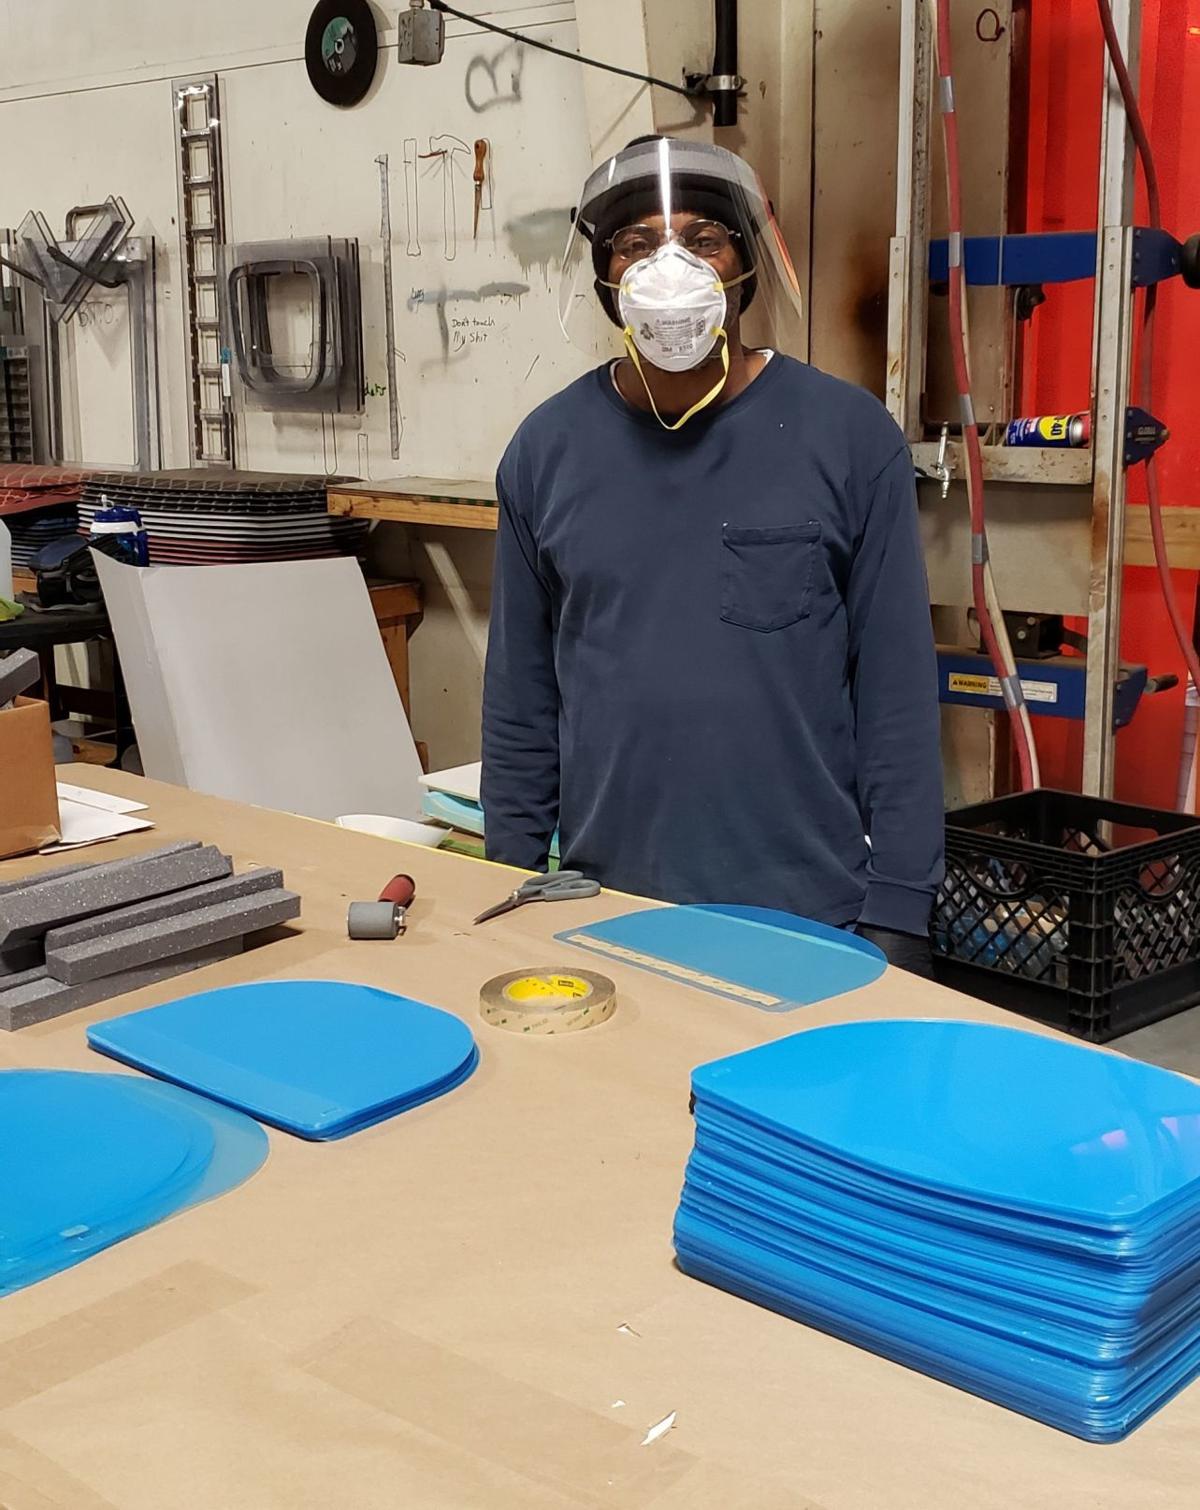 Gelpro S Waco Plant To Make Protective Face Shields For Covid 19